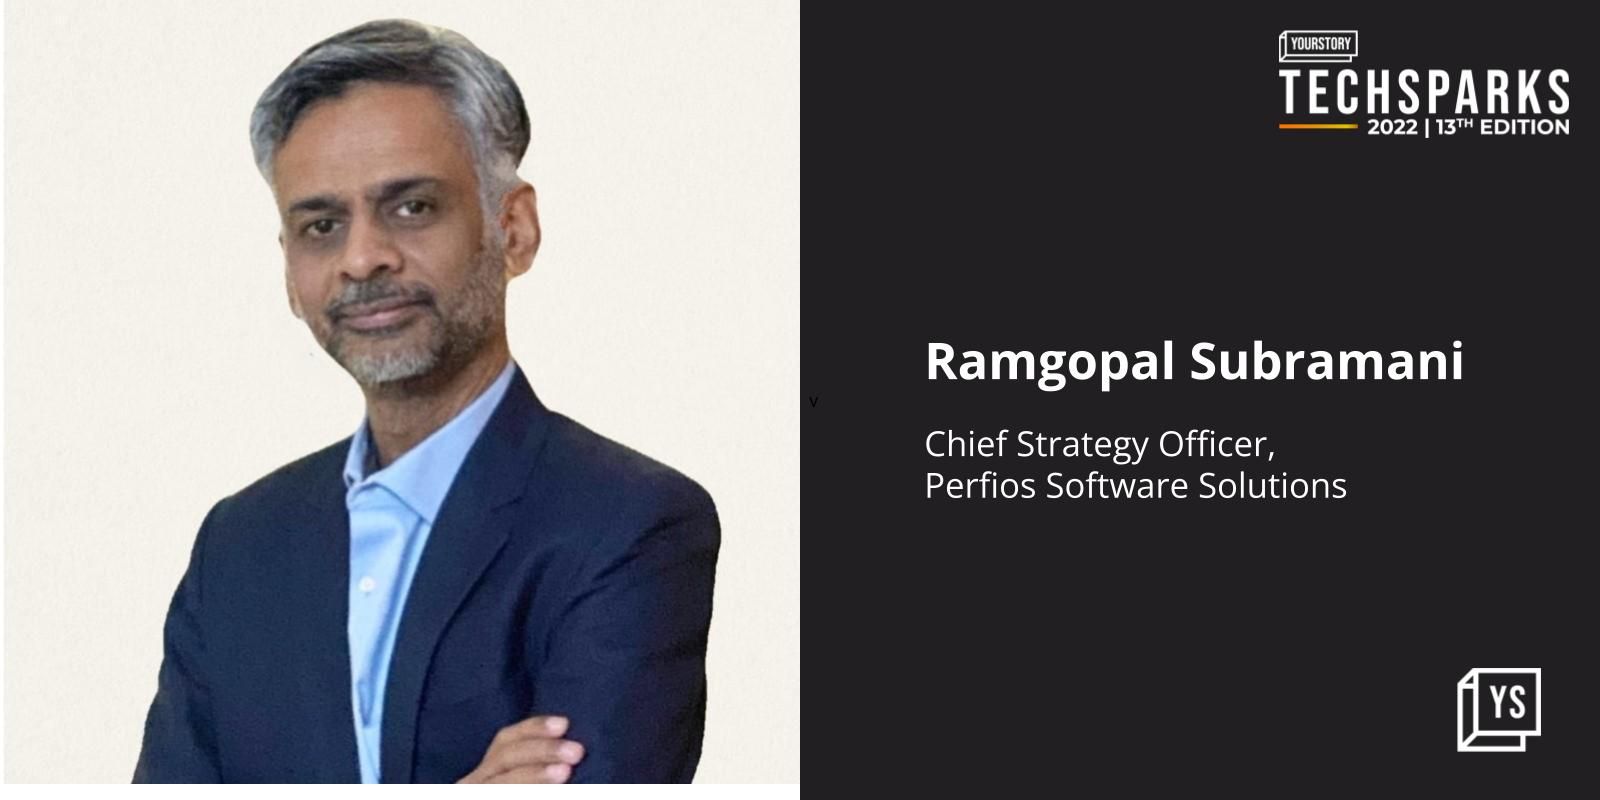 Can we trust data? Perfios CSO Ramgopal Subramani says yes